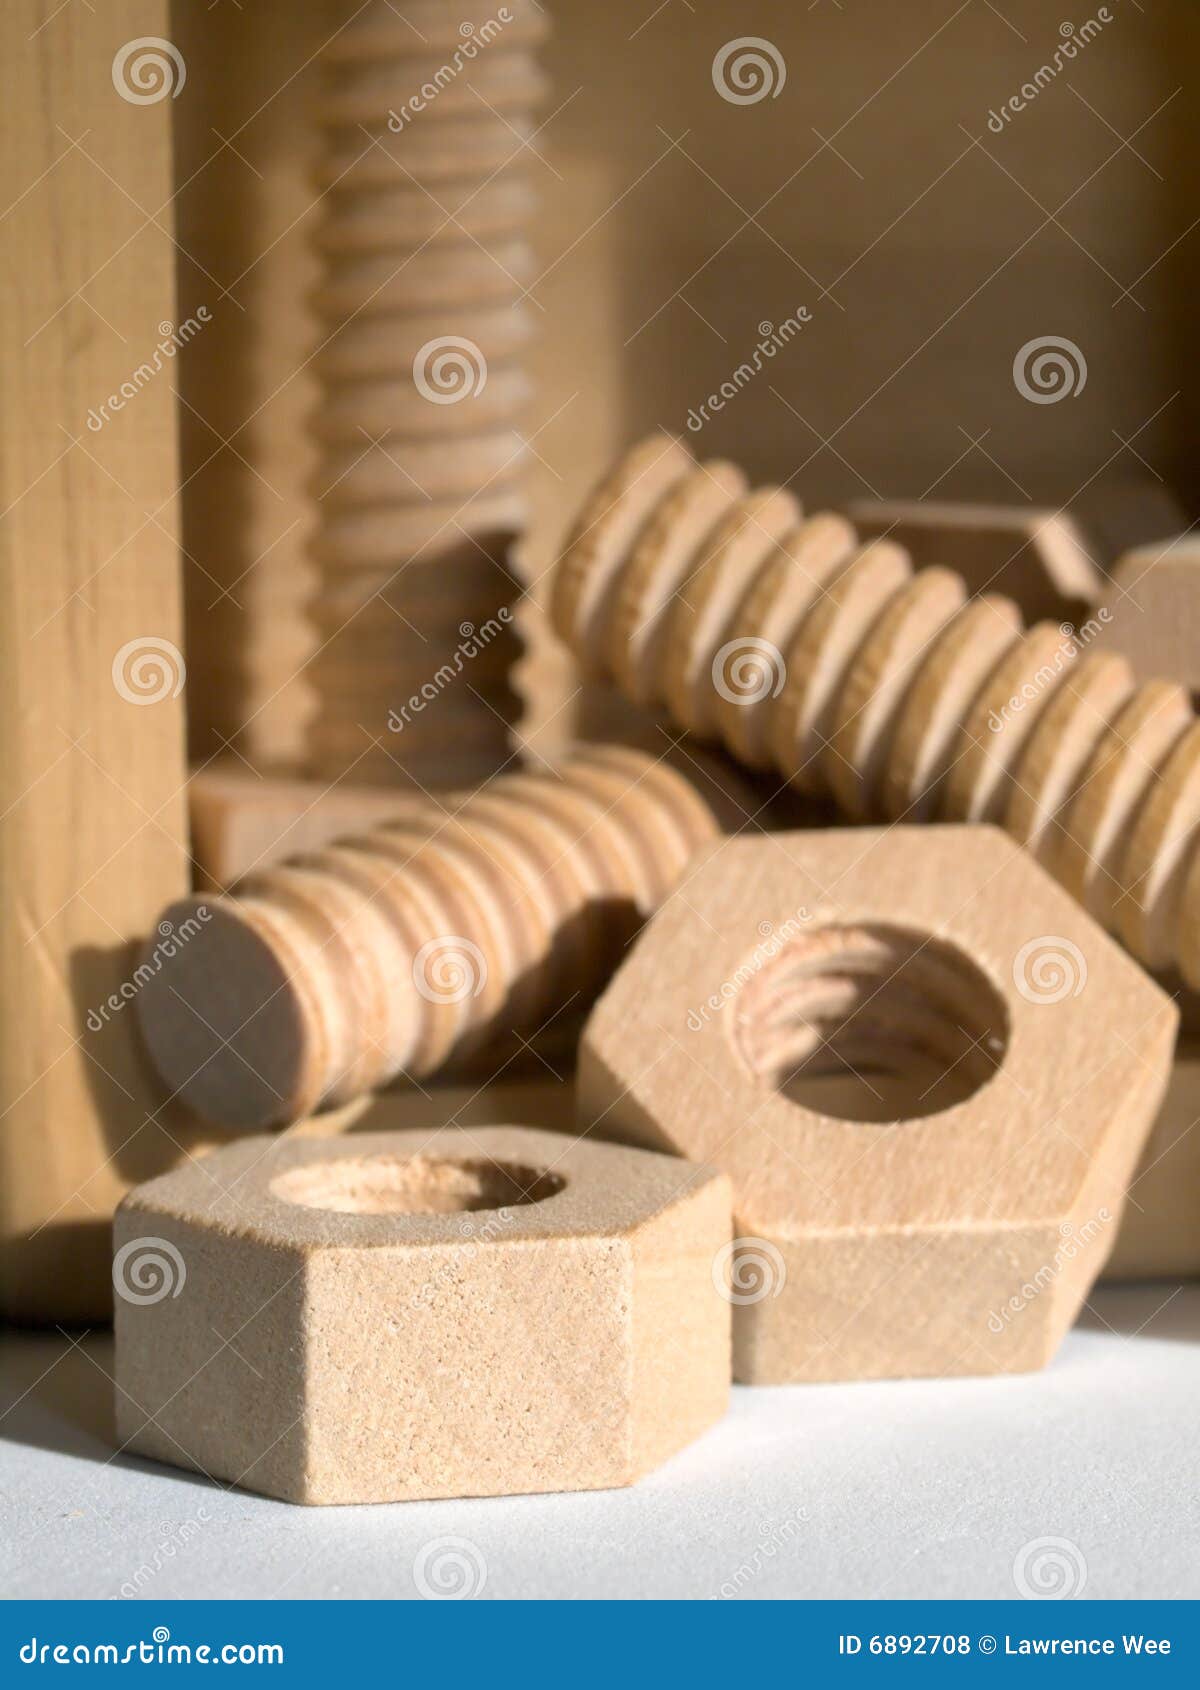 Wood bolts puzzle